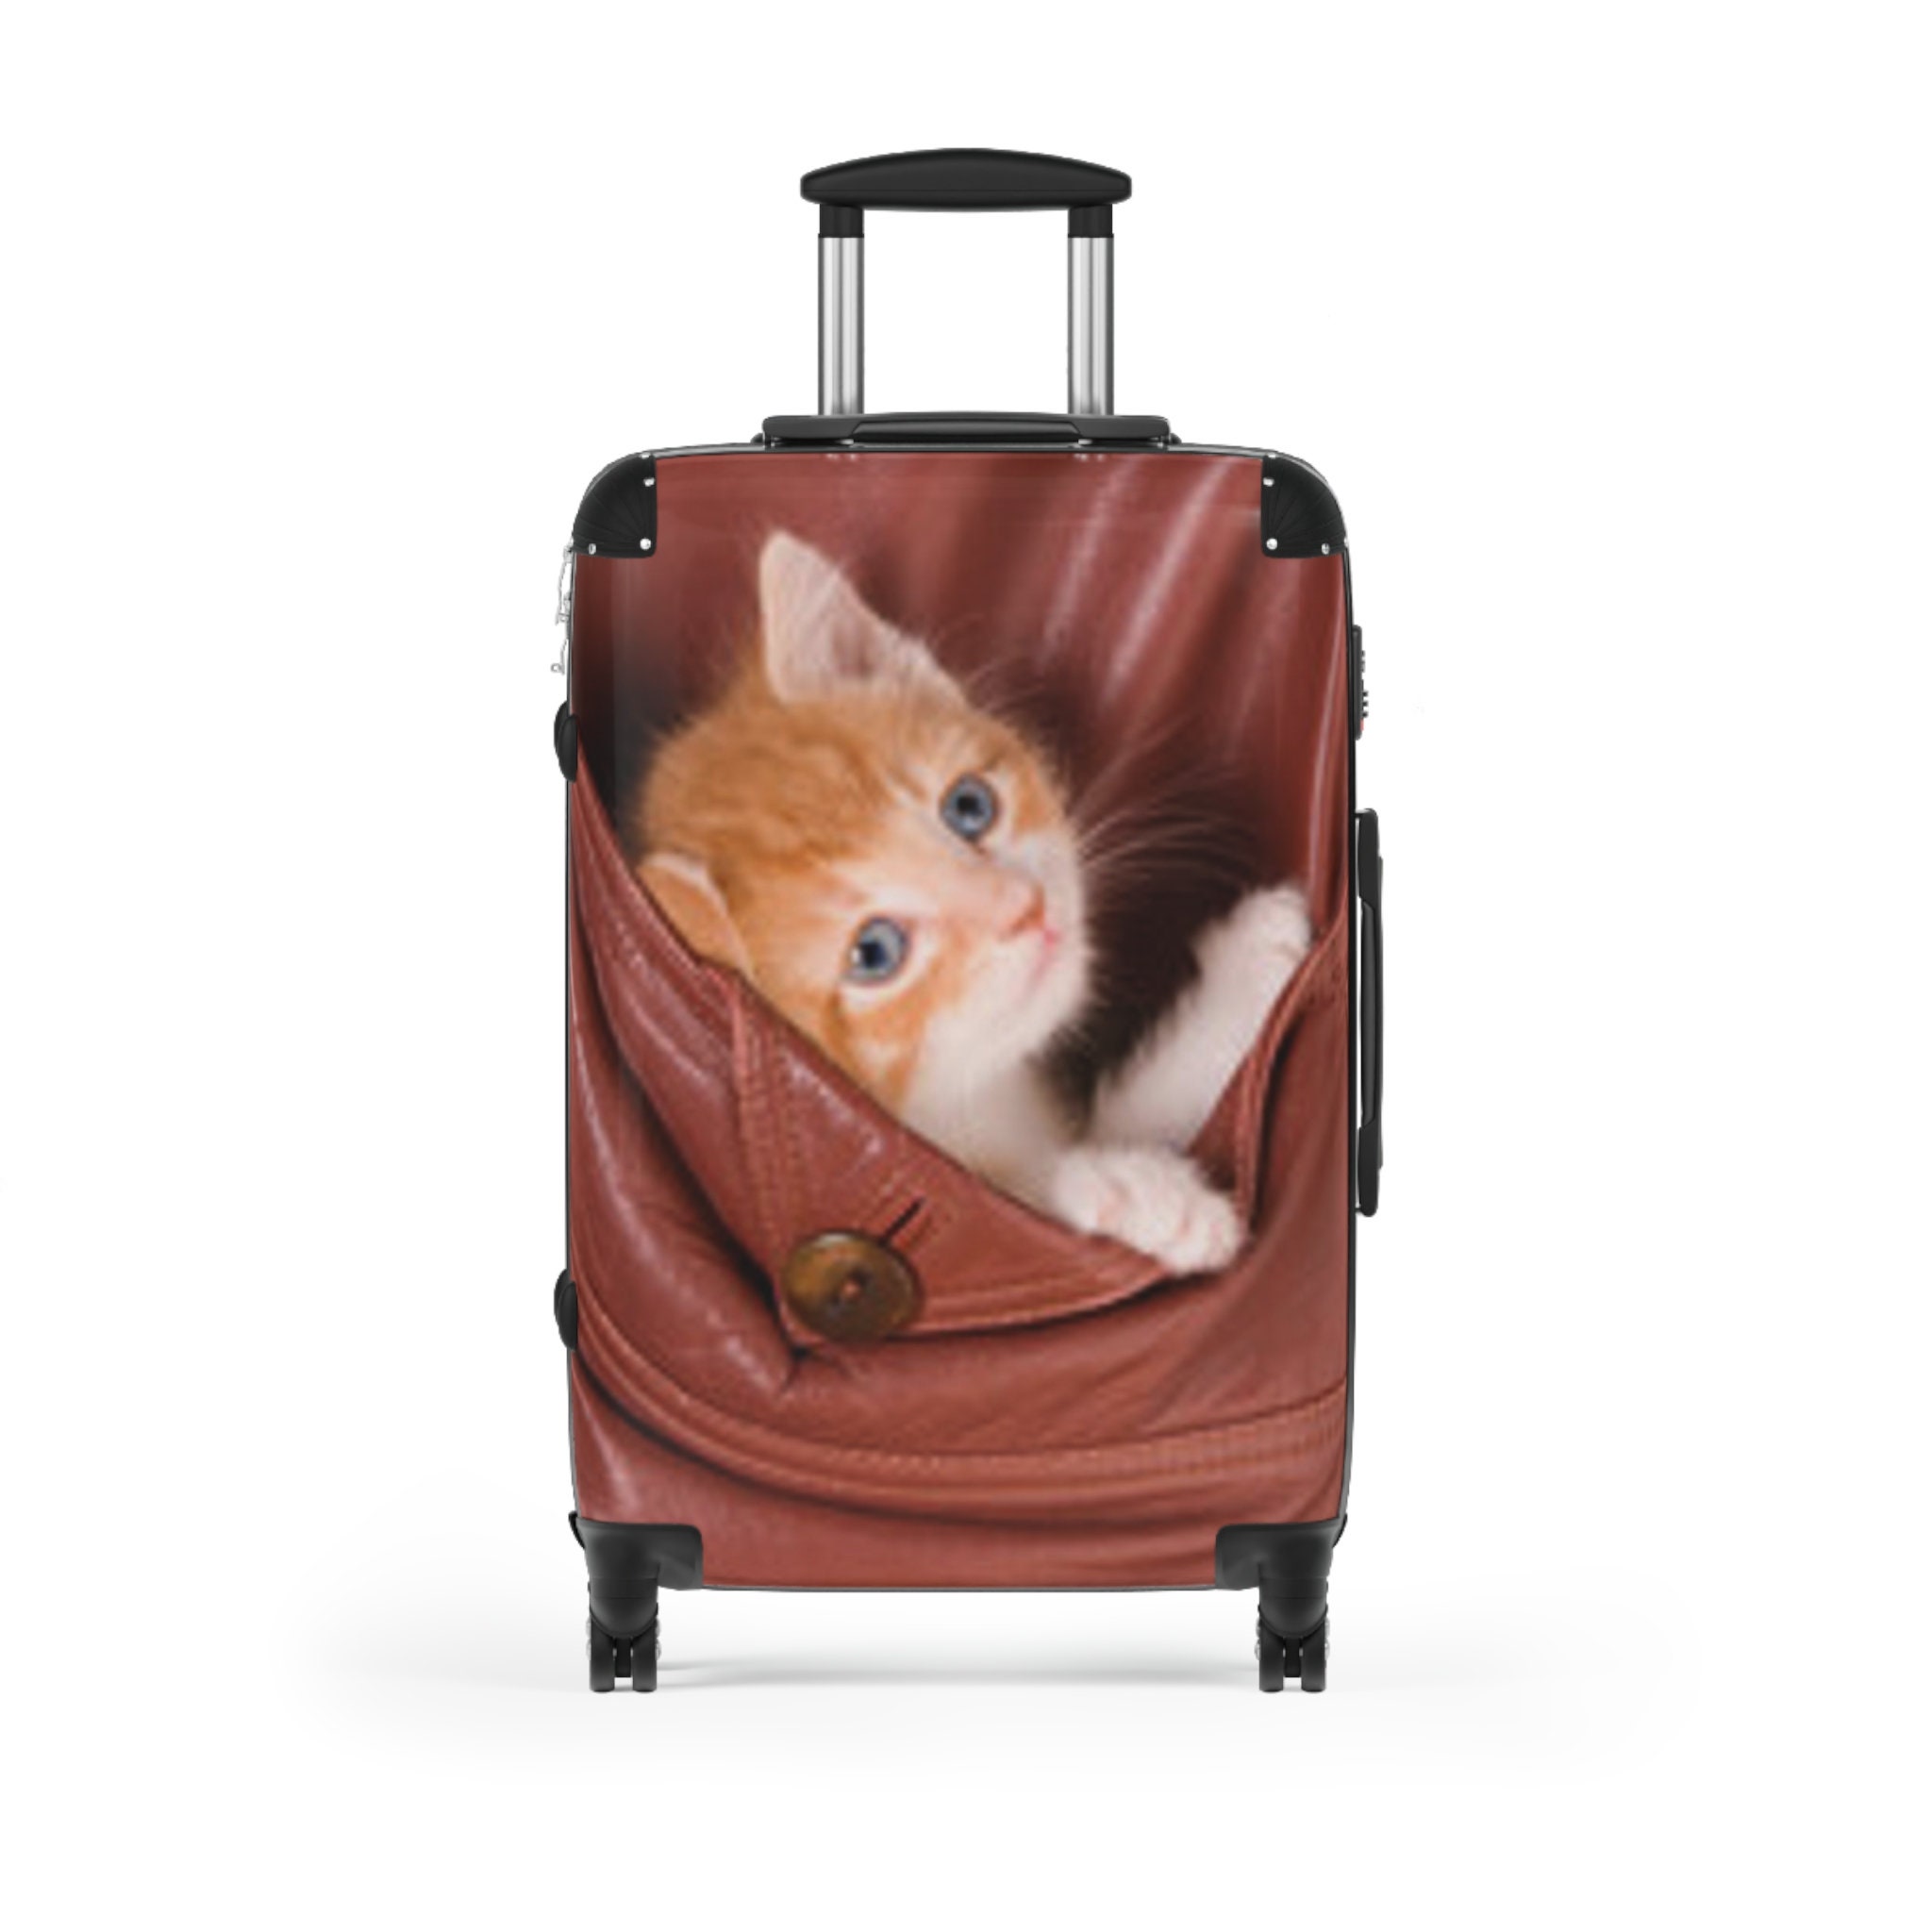 Luggage Kitten in a pocket Suitcase, Hard Shell Travel Suitcase | Pet lovers Suitcase